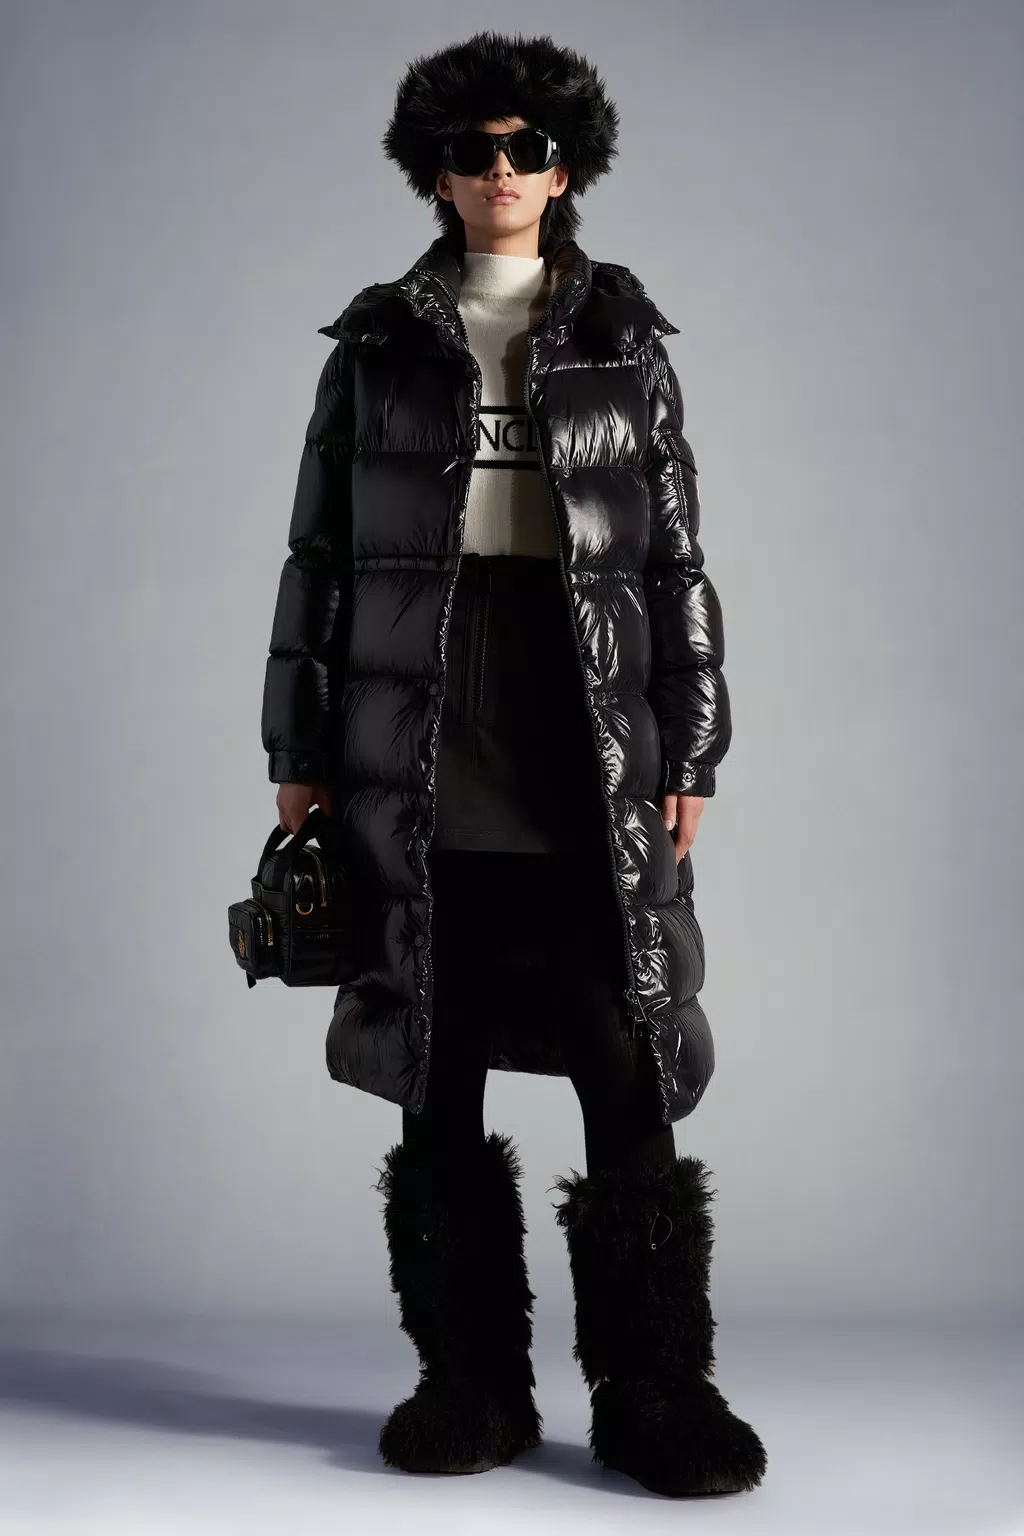 Unlock Wilderness' choice in the Moncler Vs North Face comparison, the Cavettaz Long Down Jacket by Moncler